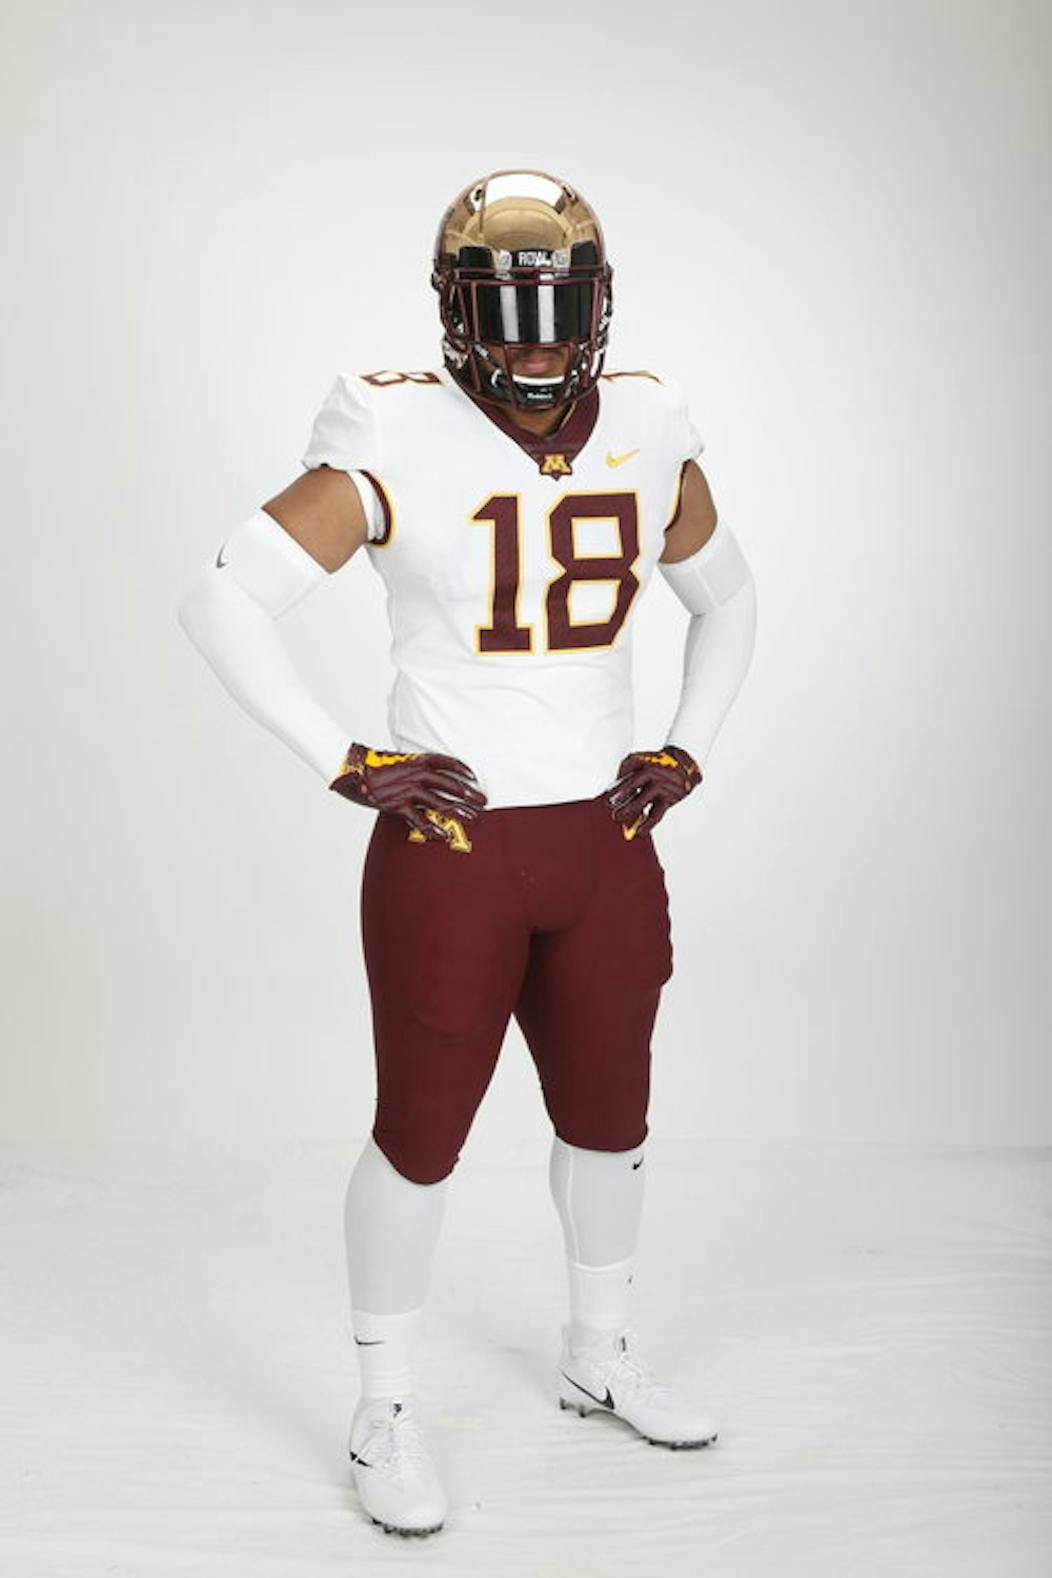 Reacting to the new Minnesota Football uniforms - The Daily Gopher